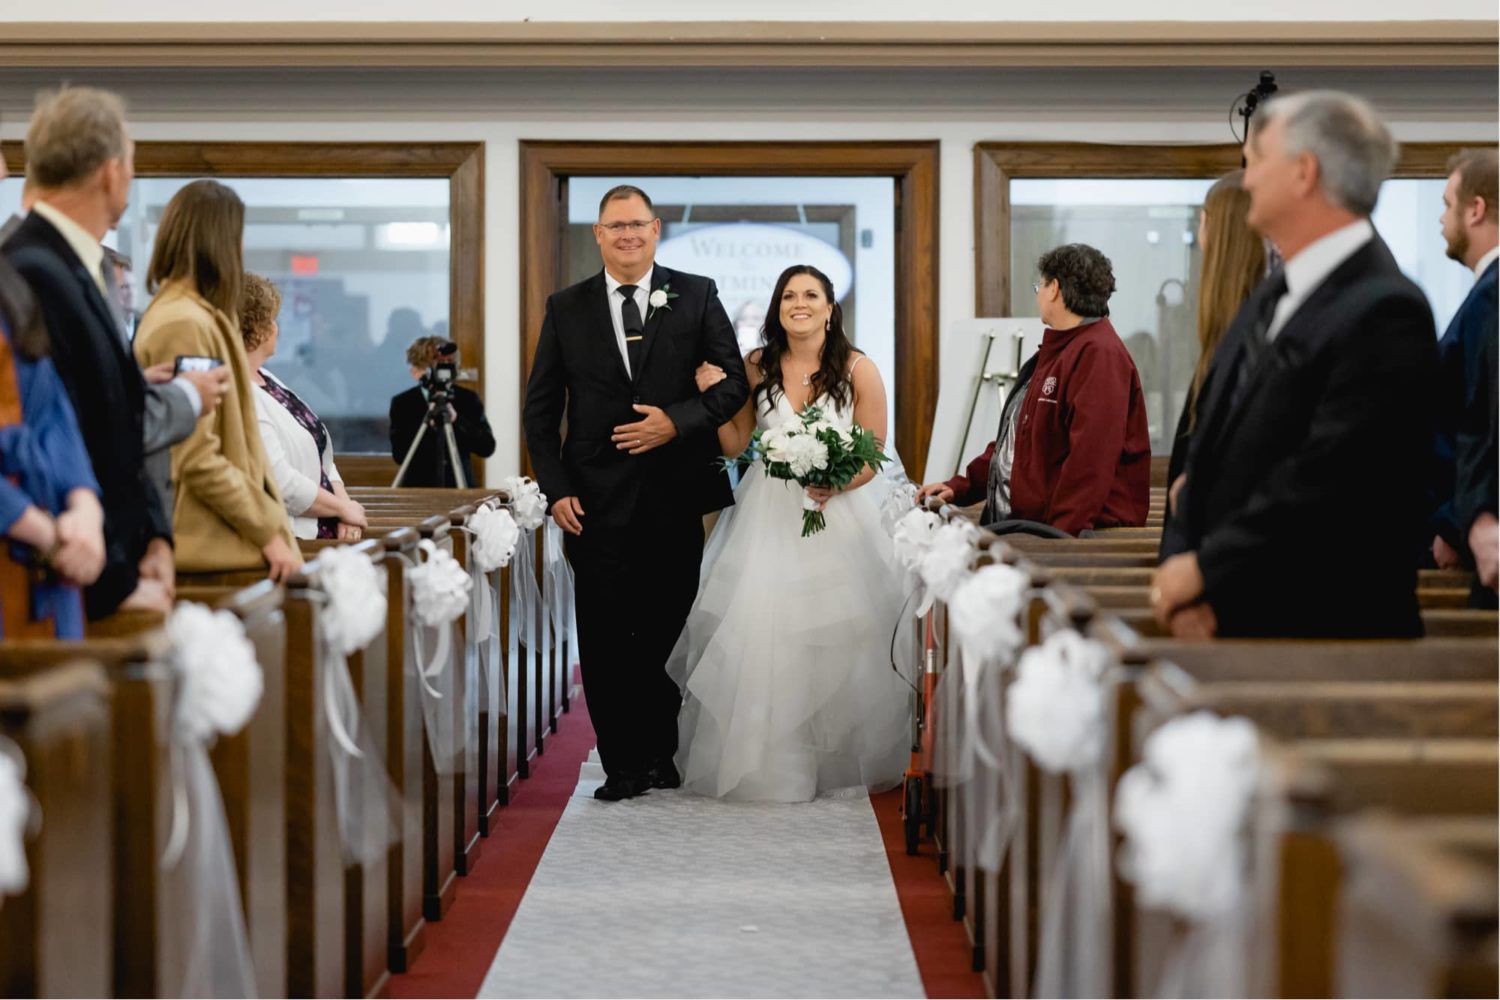 Bride being escorted down the aisle by her father at the wedding ceremony